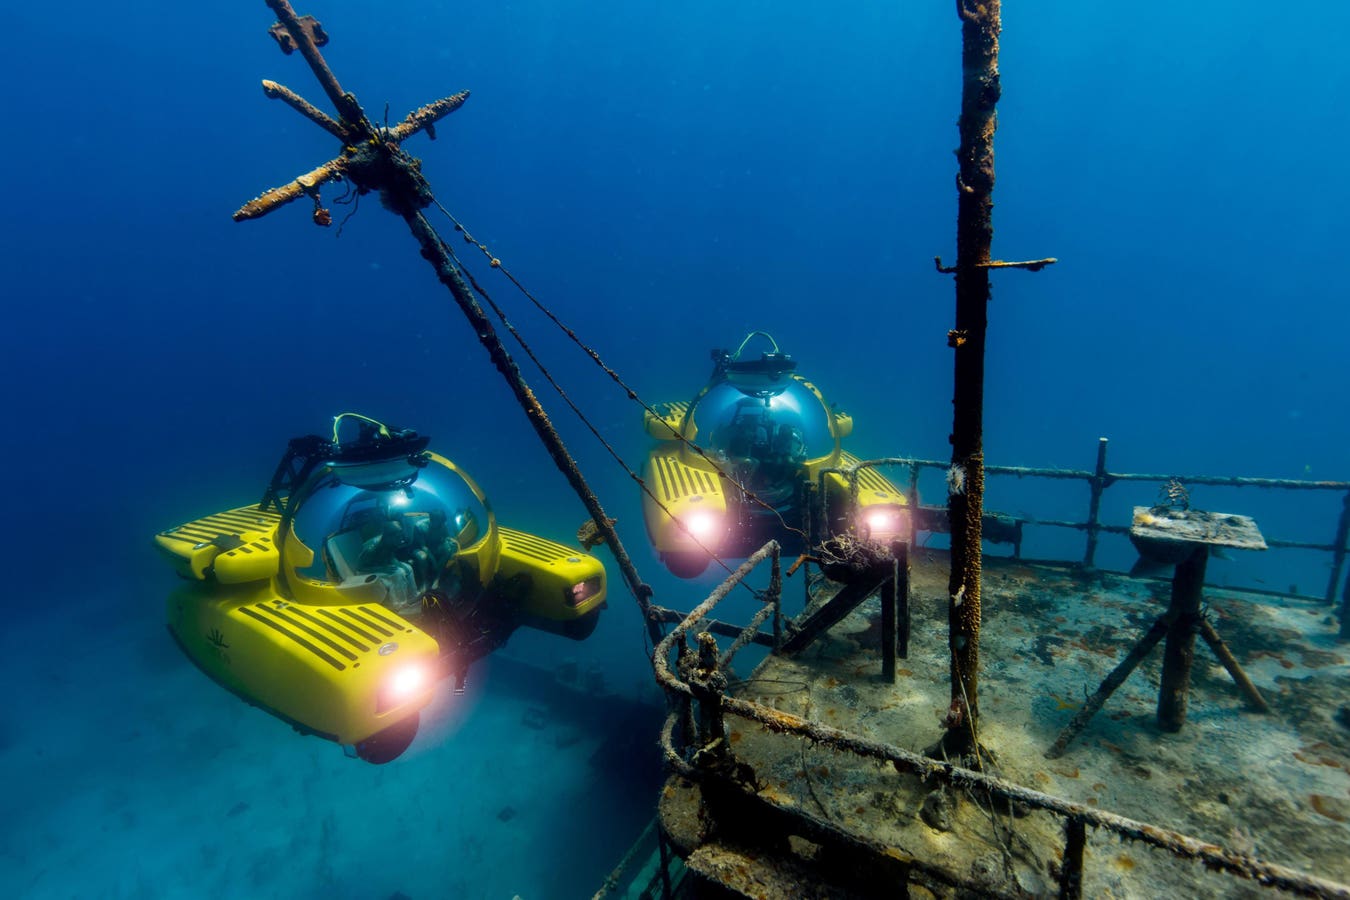 How A Submersible Became The Ultimate Status Symbol For Superyacht Owners